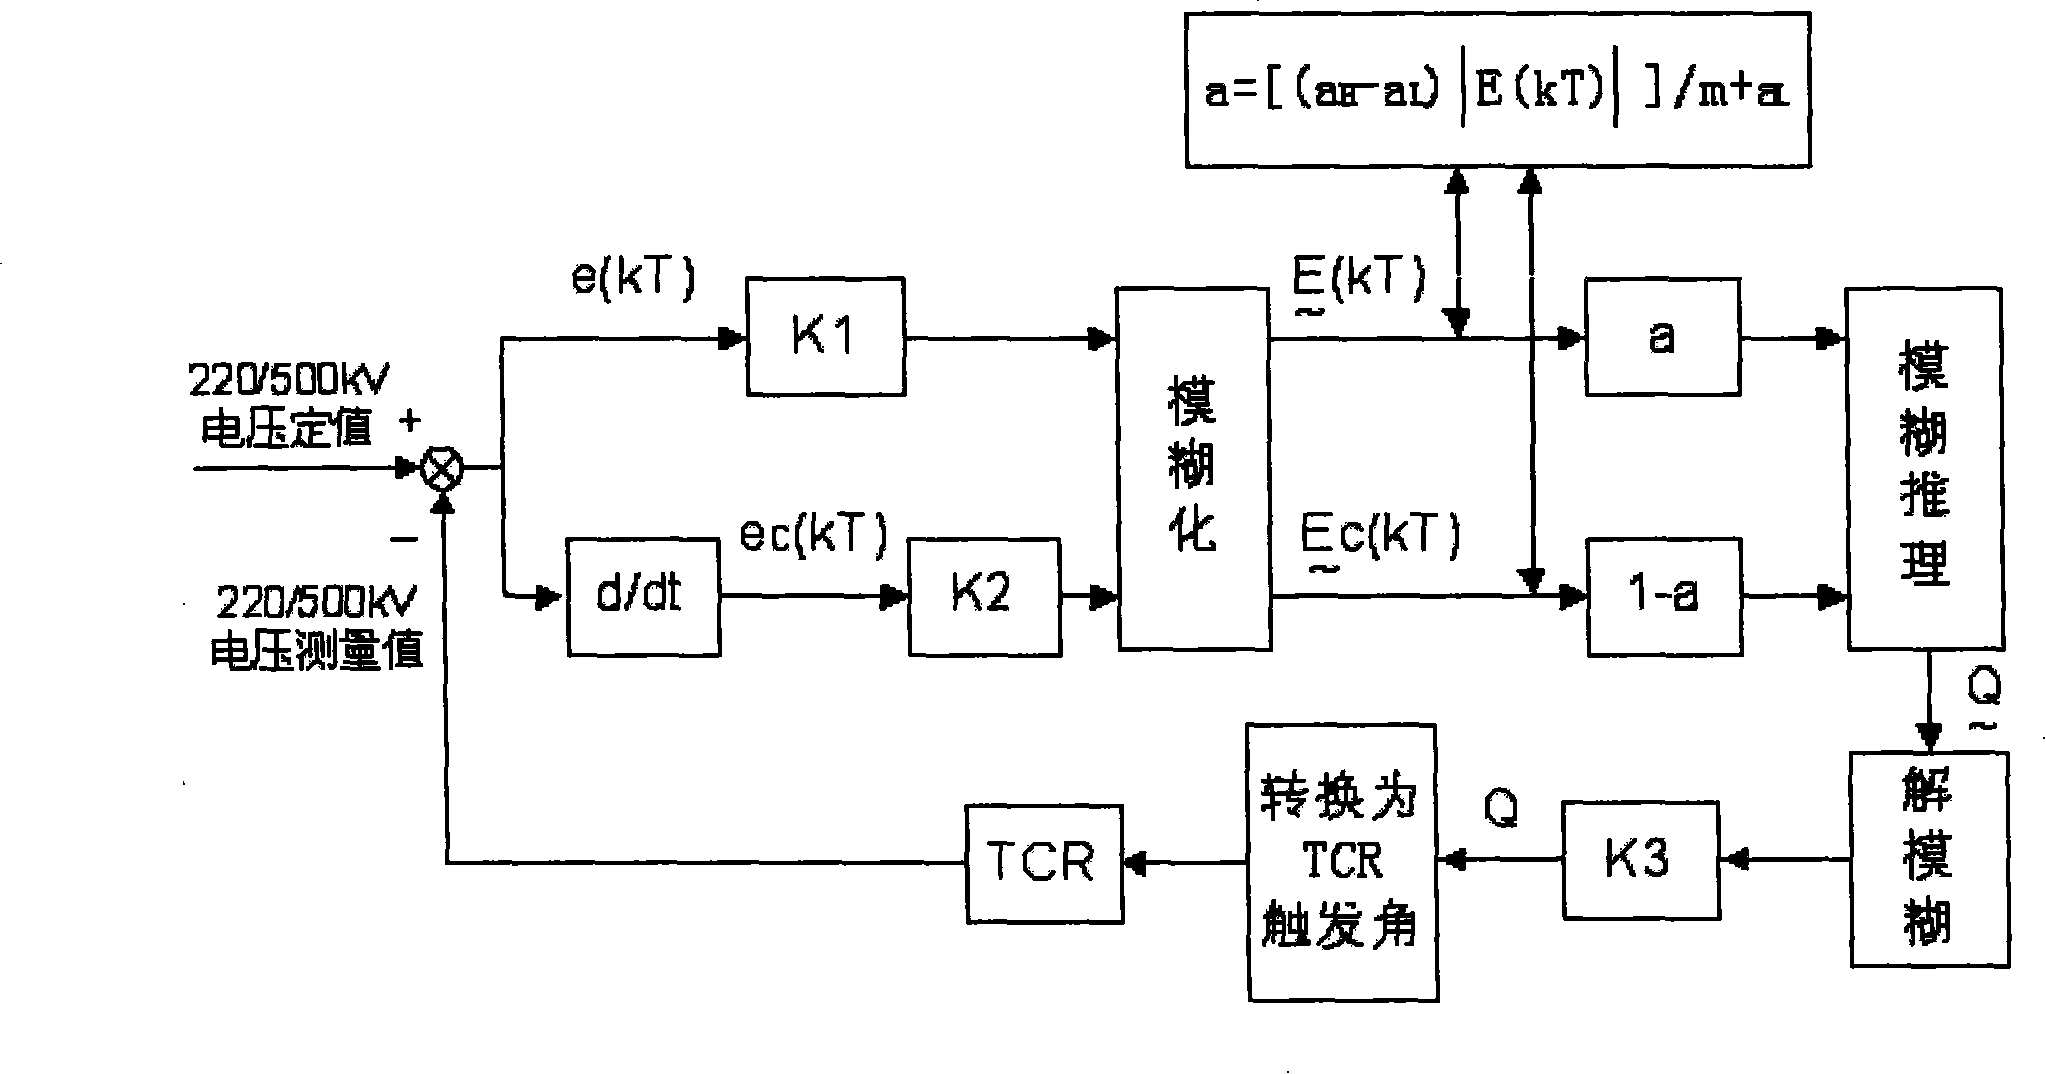 TCR type SVC voltage control method for transformer substation